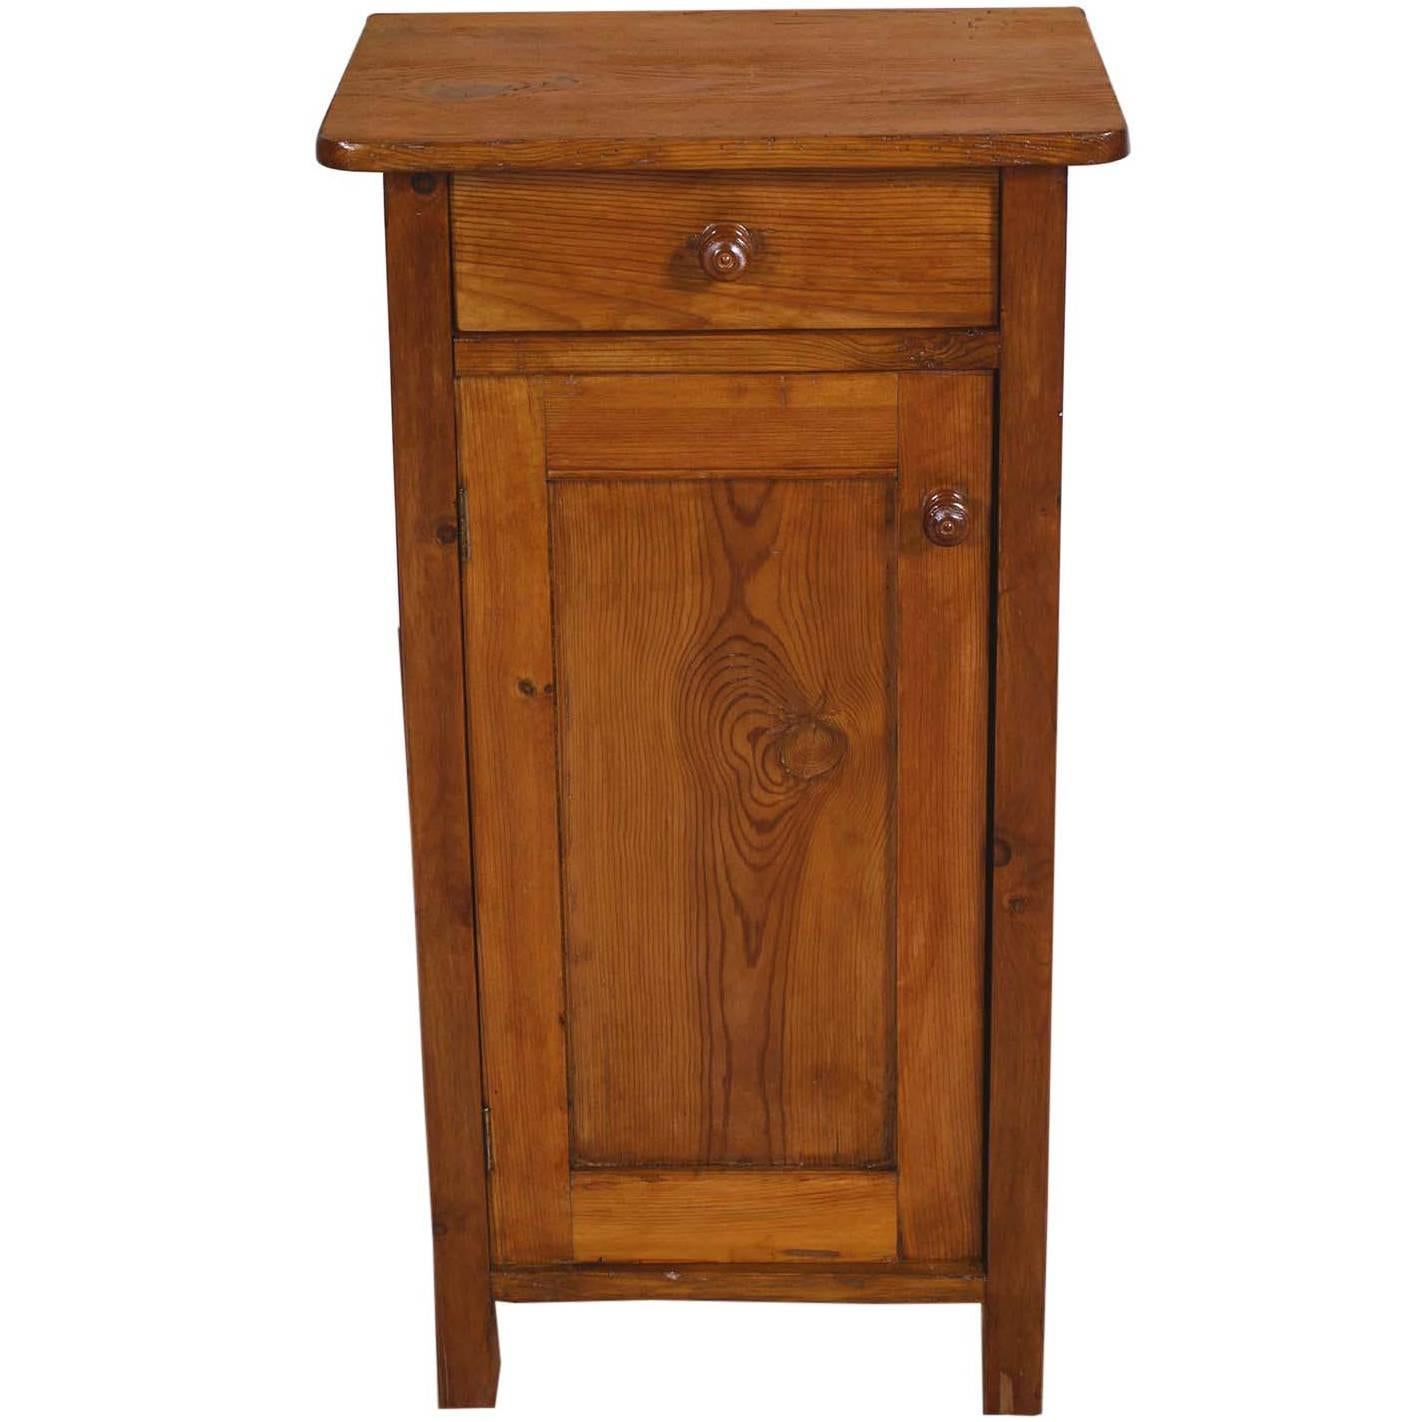 Early 20th Century Country Rustic Tyrolean Nightstand in Solid Pine Restored Wax